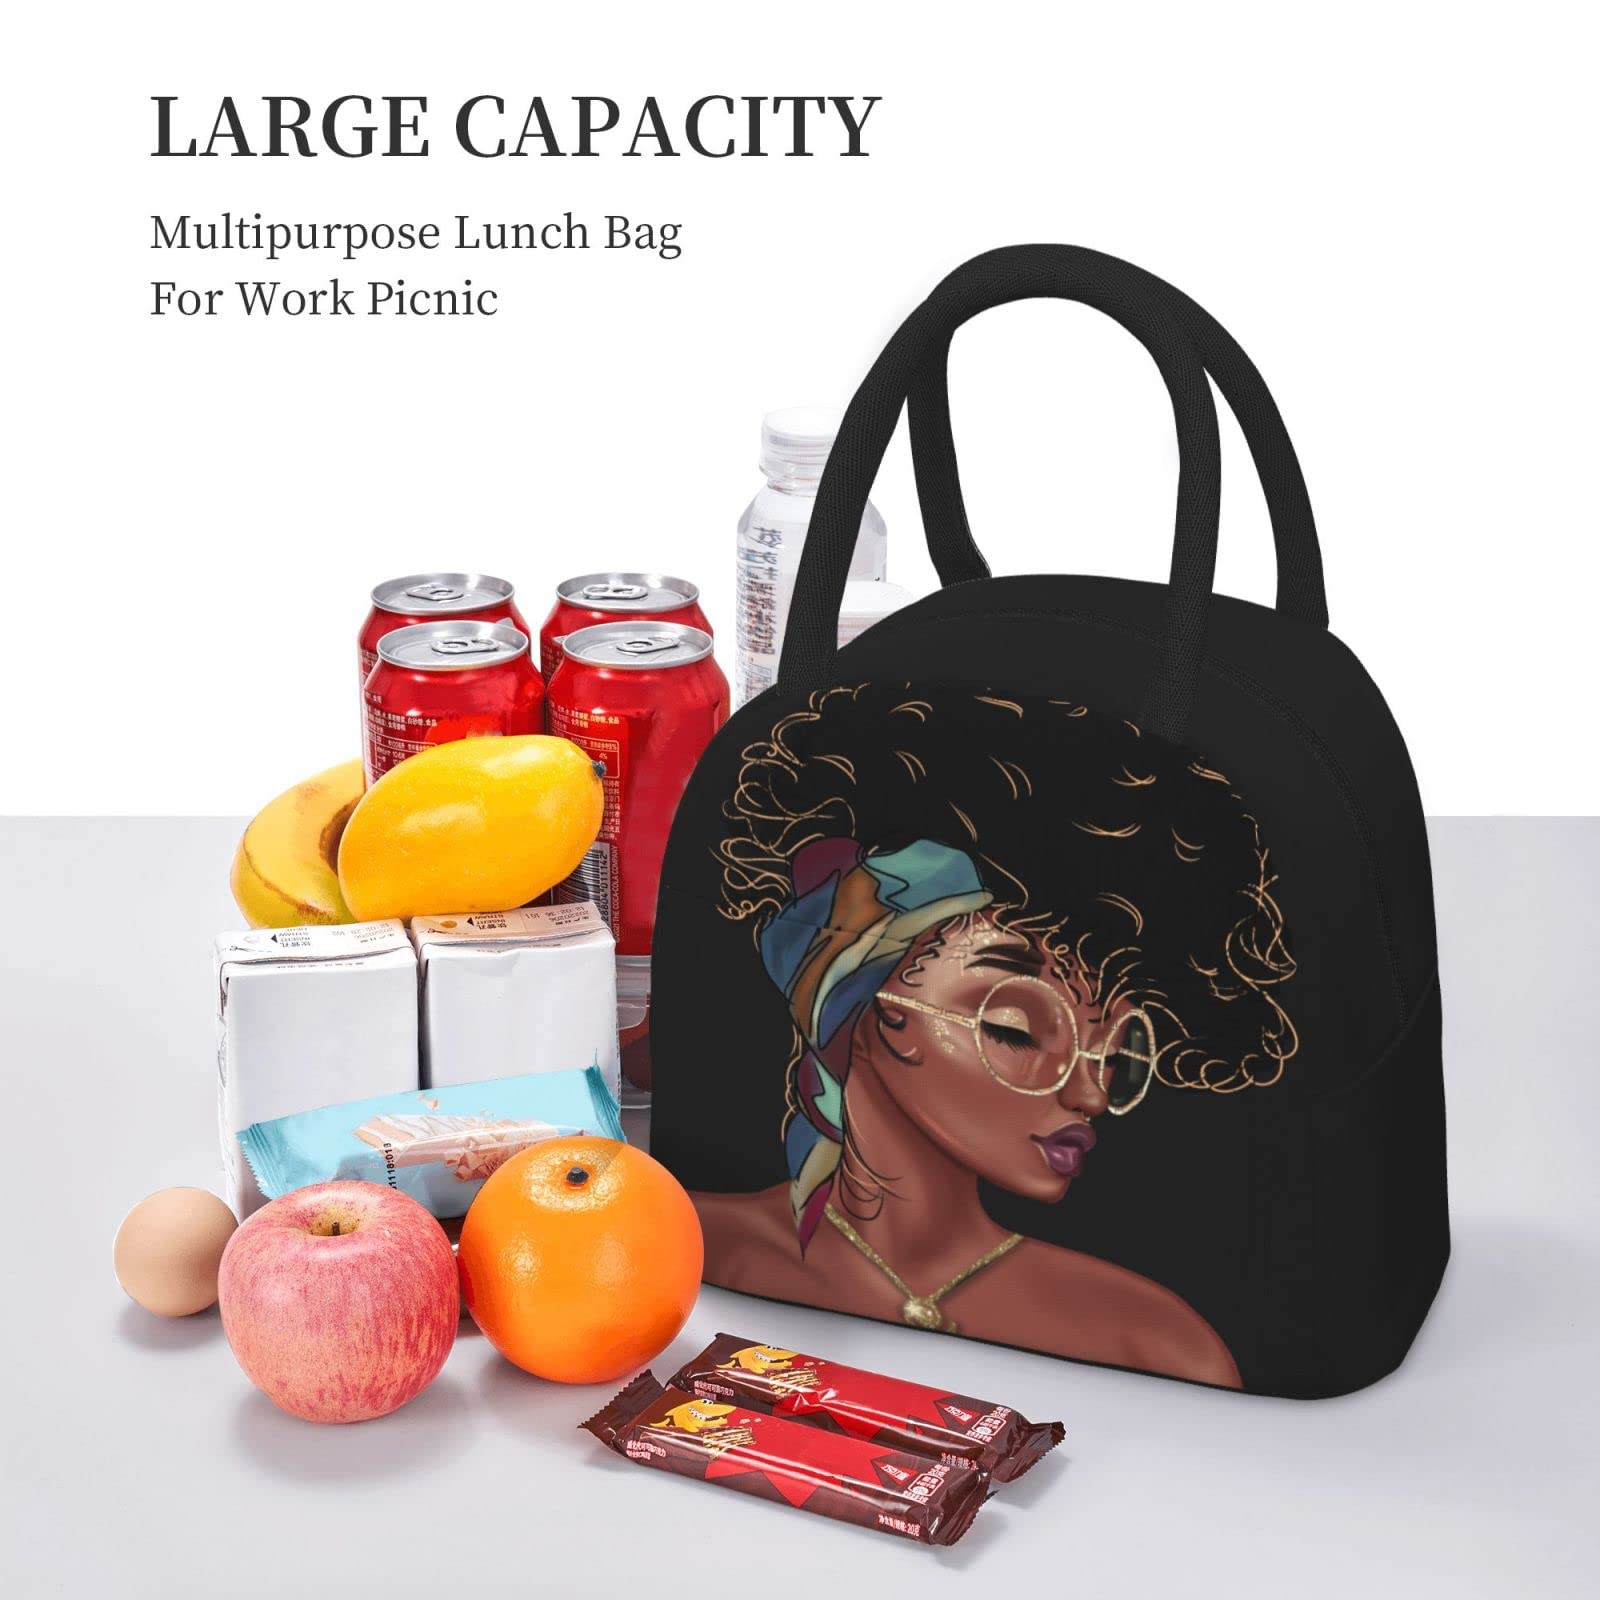 Fiokroo Lunch Bag Insulated African American Lunch Box Black Woman Reusable Waterproof Lunch Tote Bag For School Work College Outdoor Travel Picnic, 10l